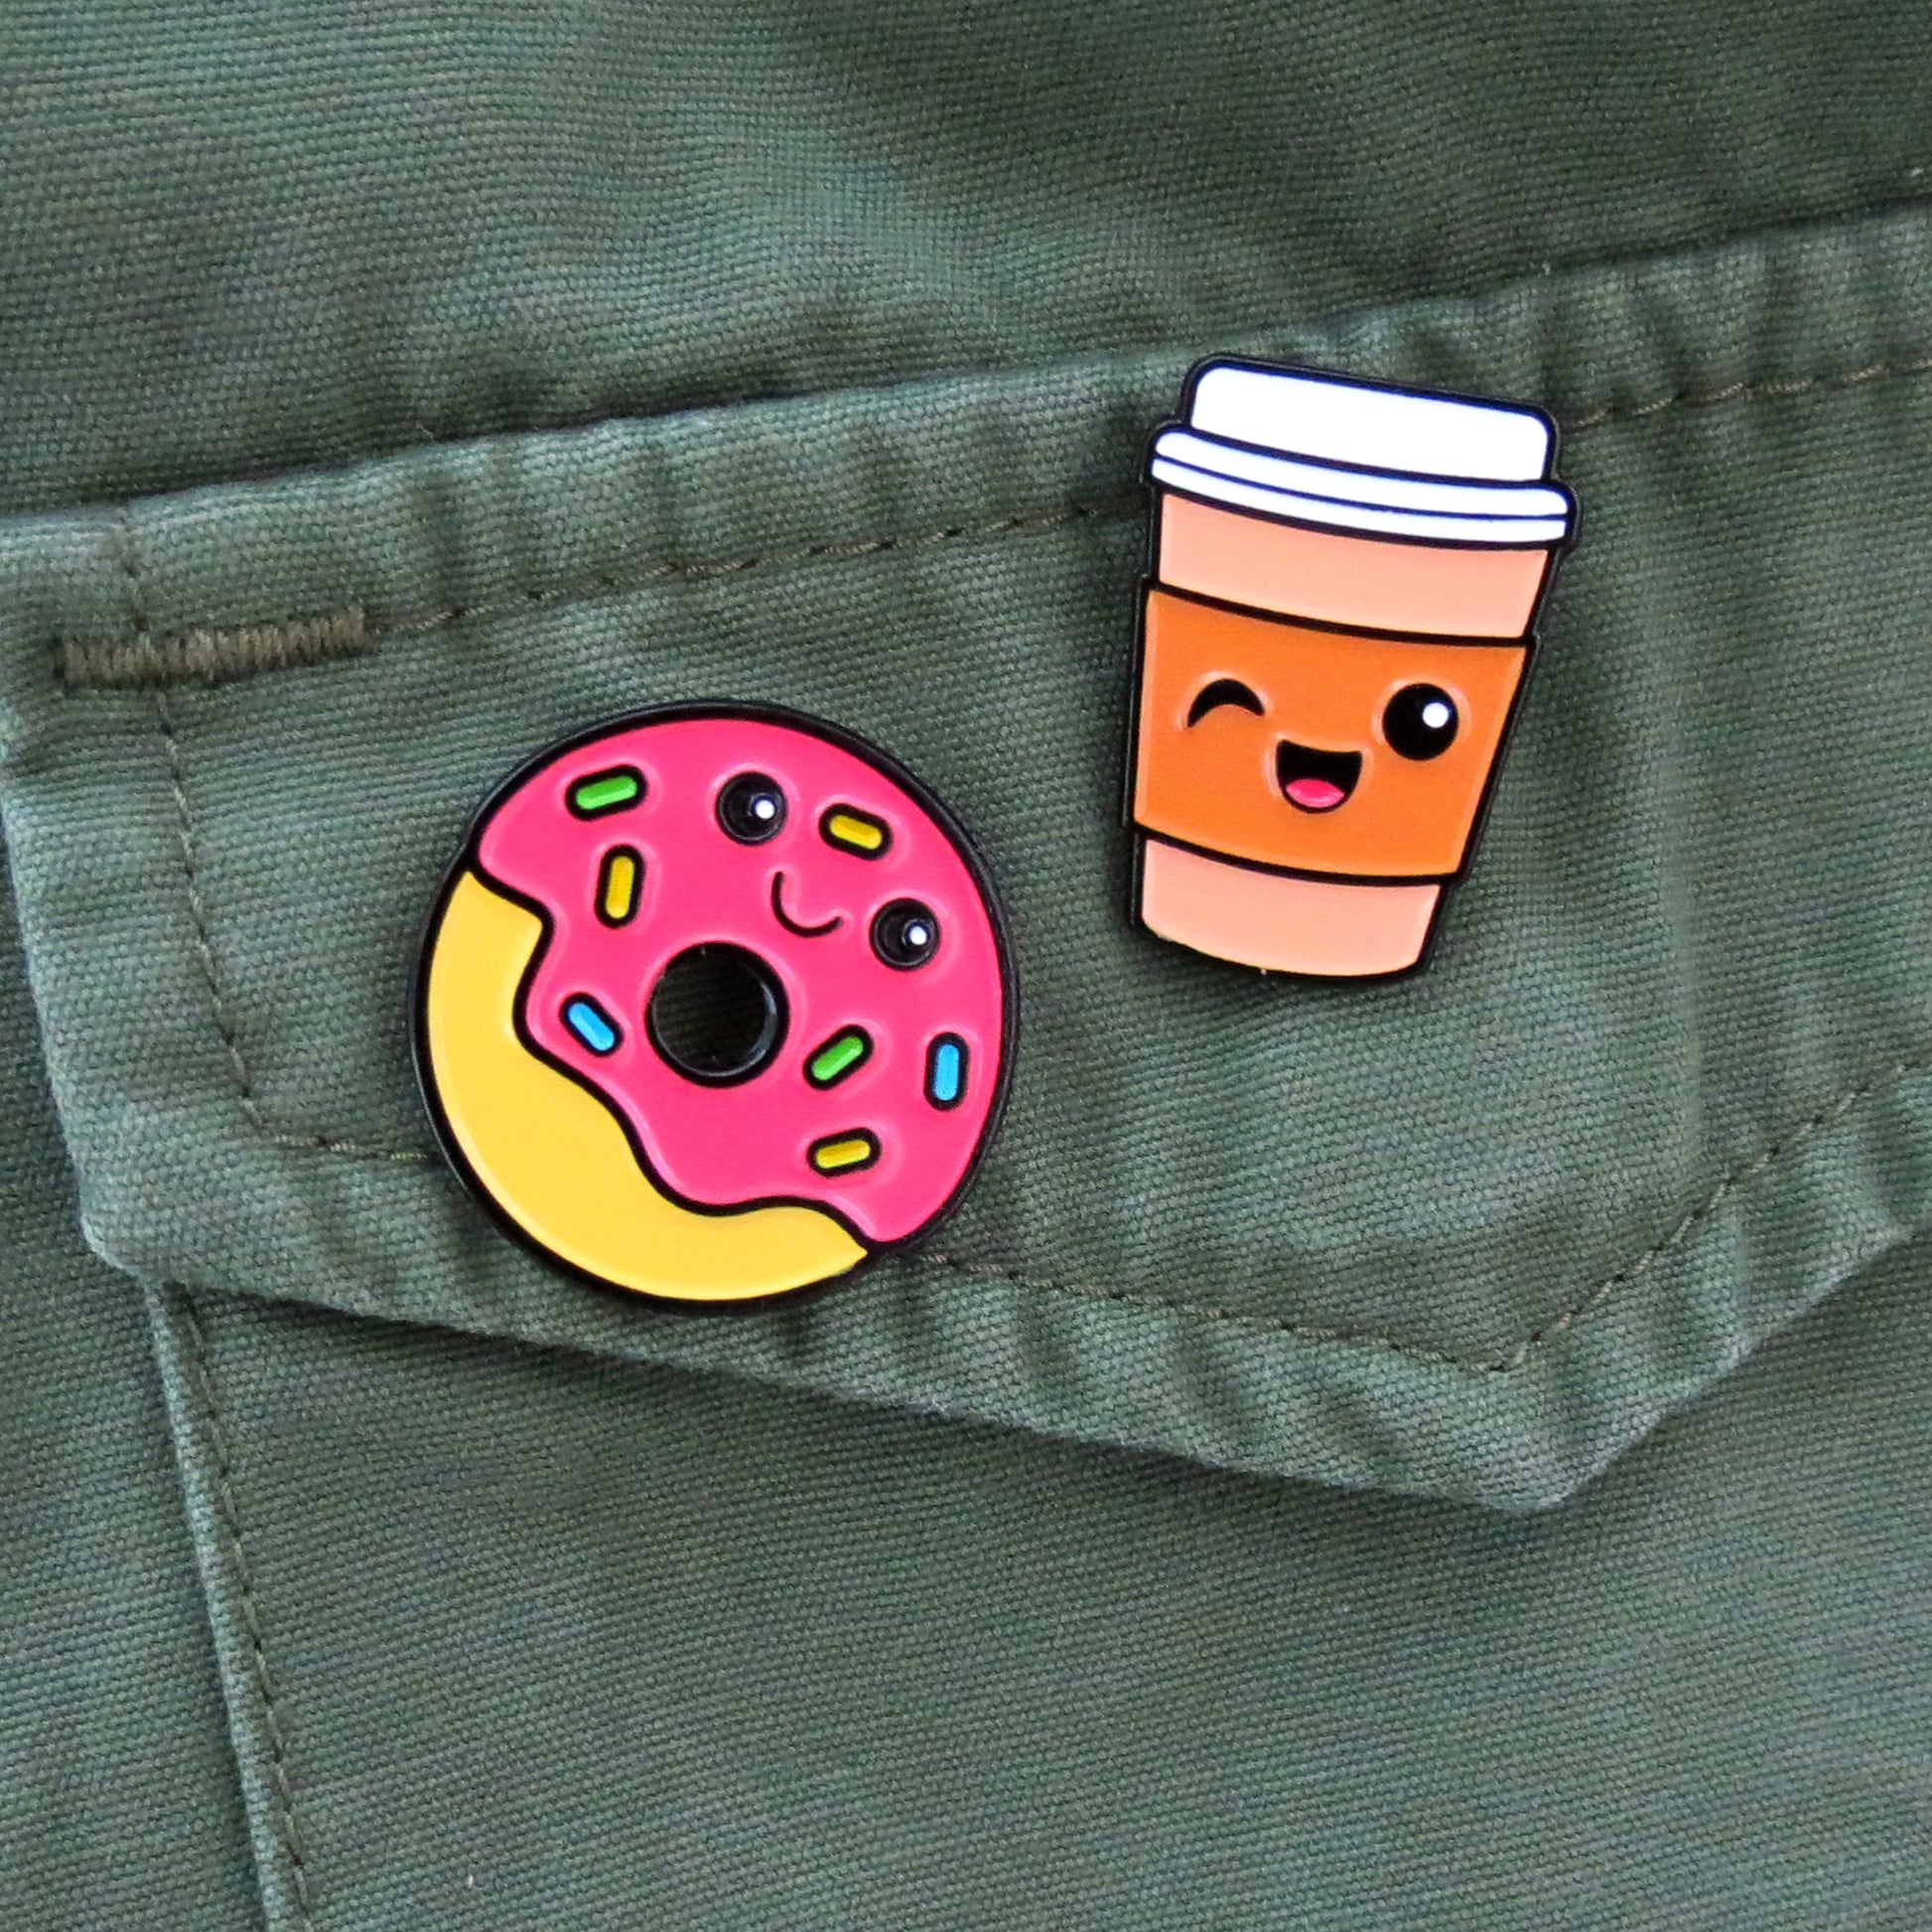 Donut and Coffee enamel pins on olive green canvas jacket pocket